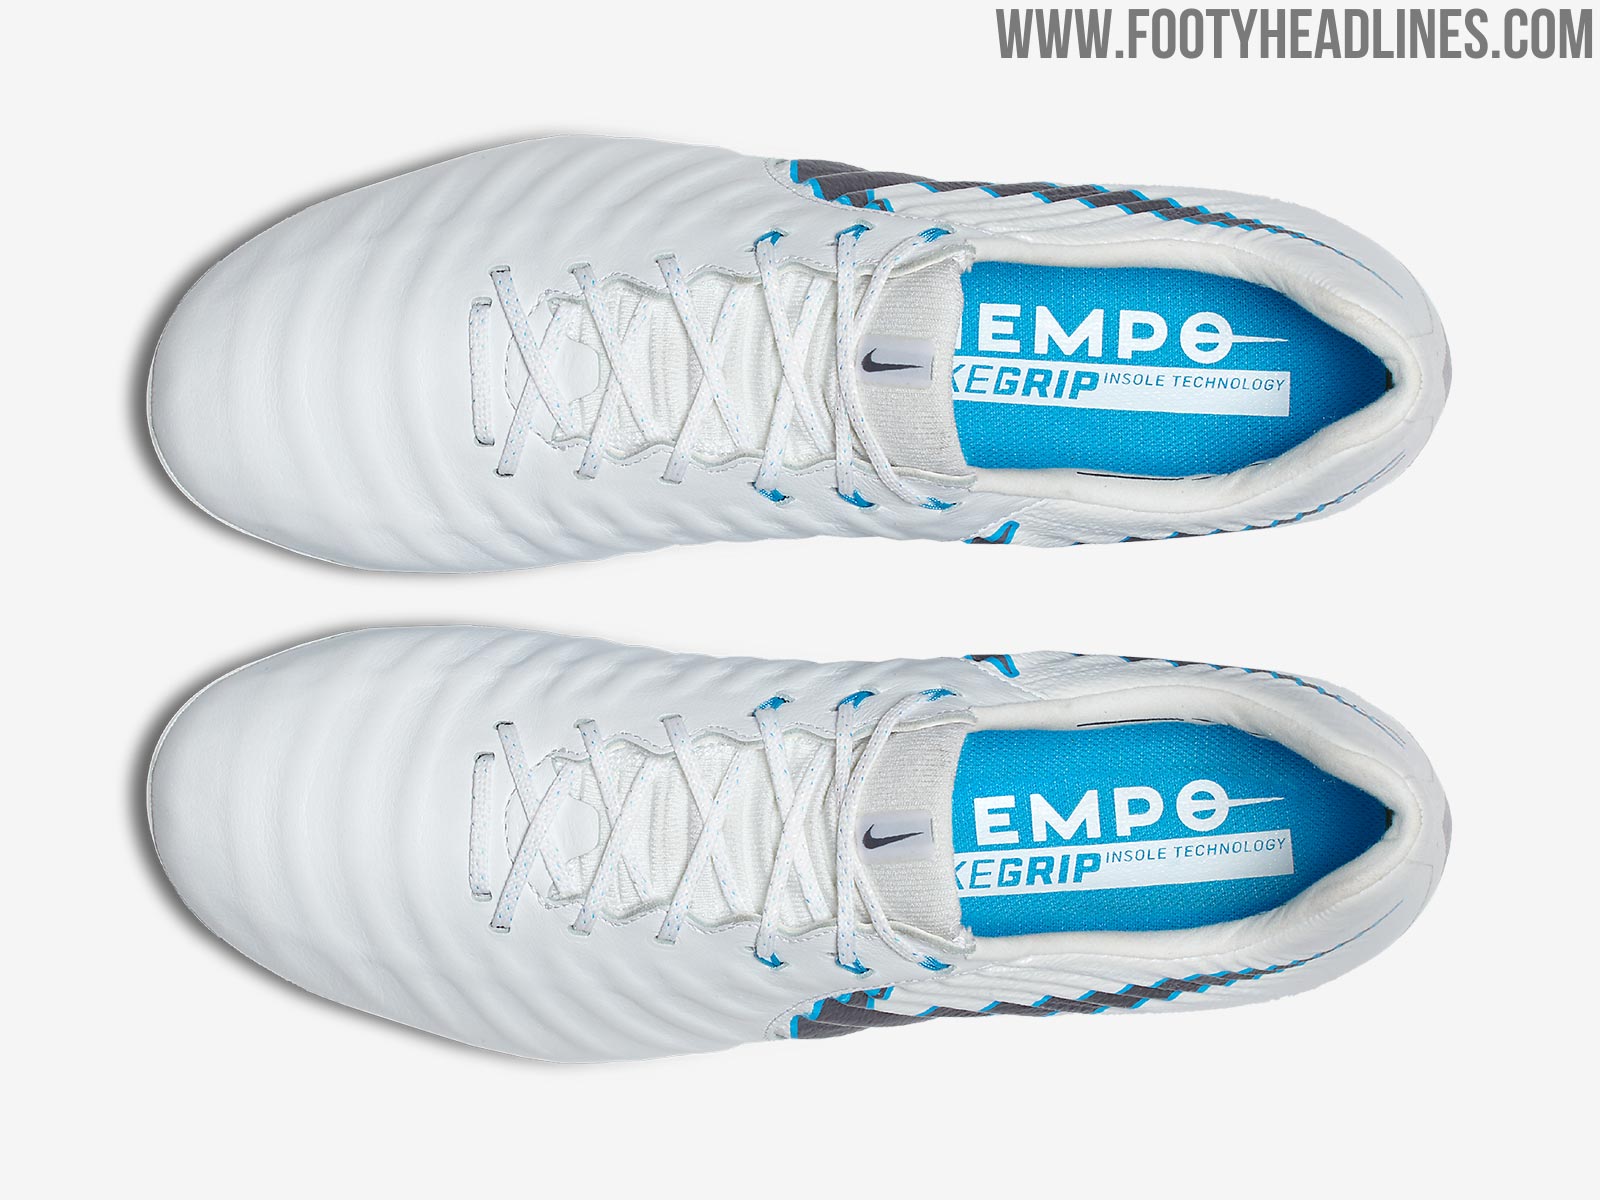 nike tiempo 2018 world cup boots